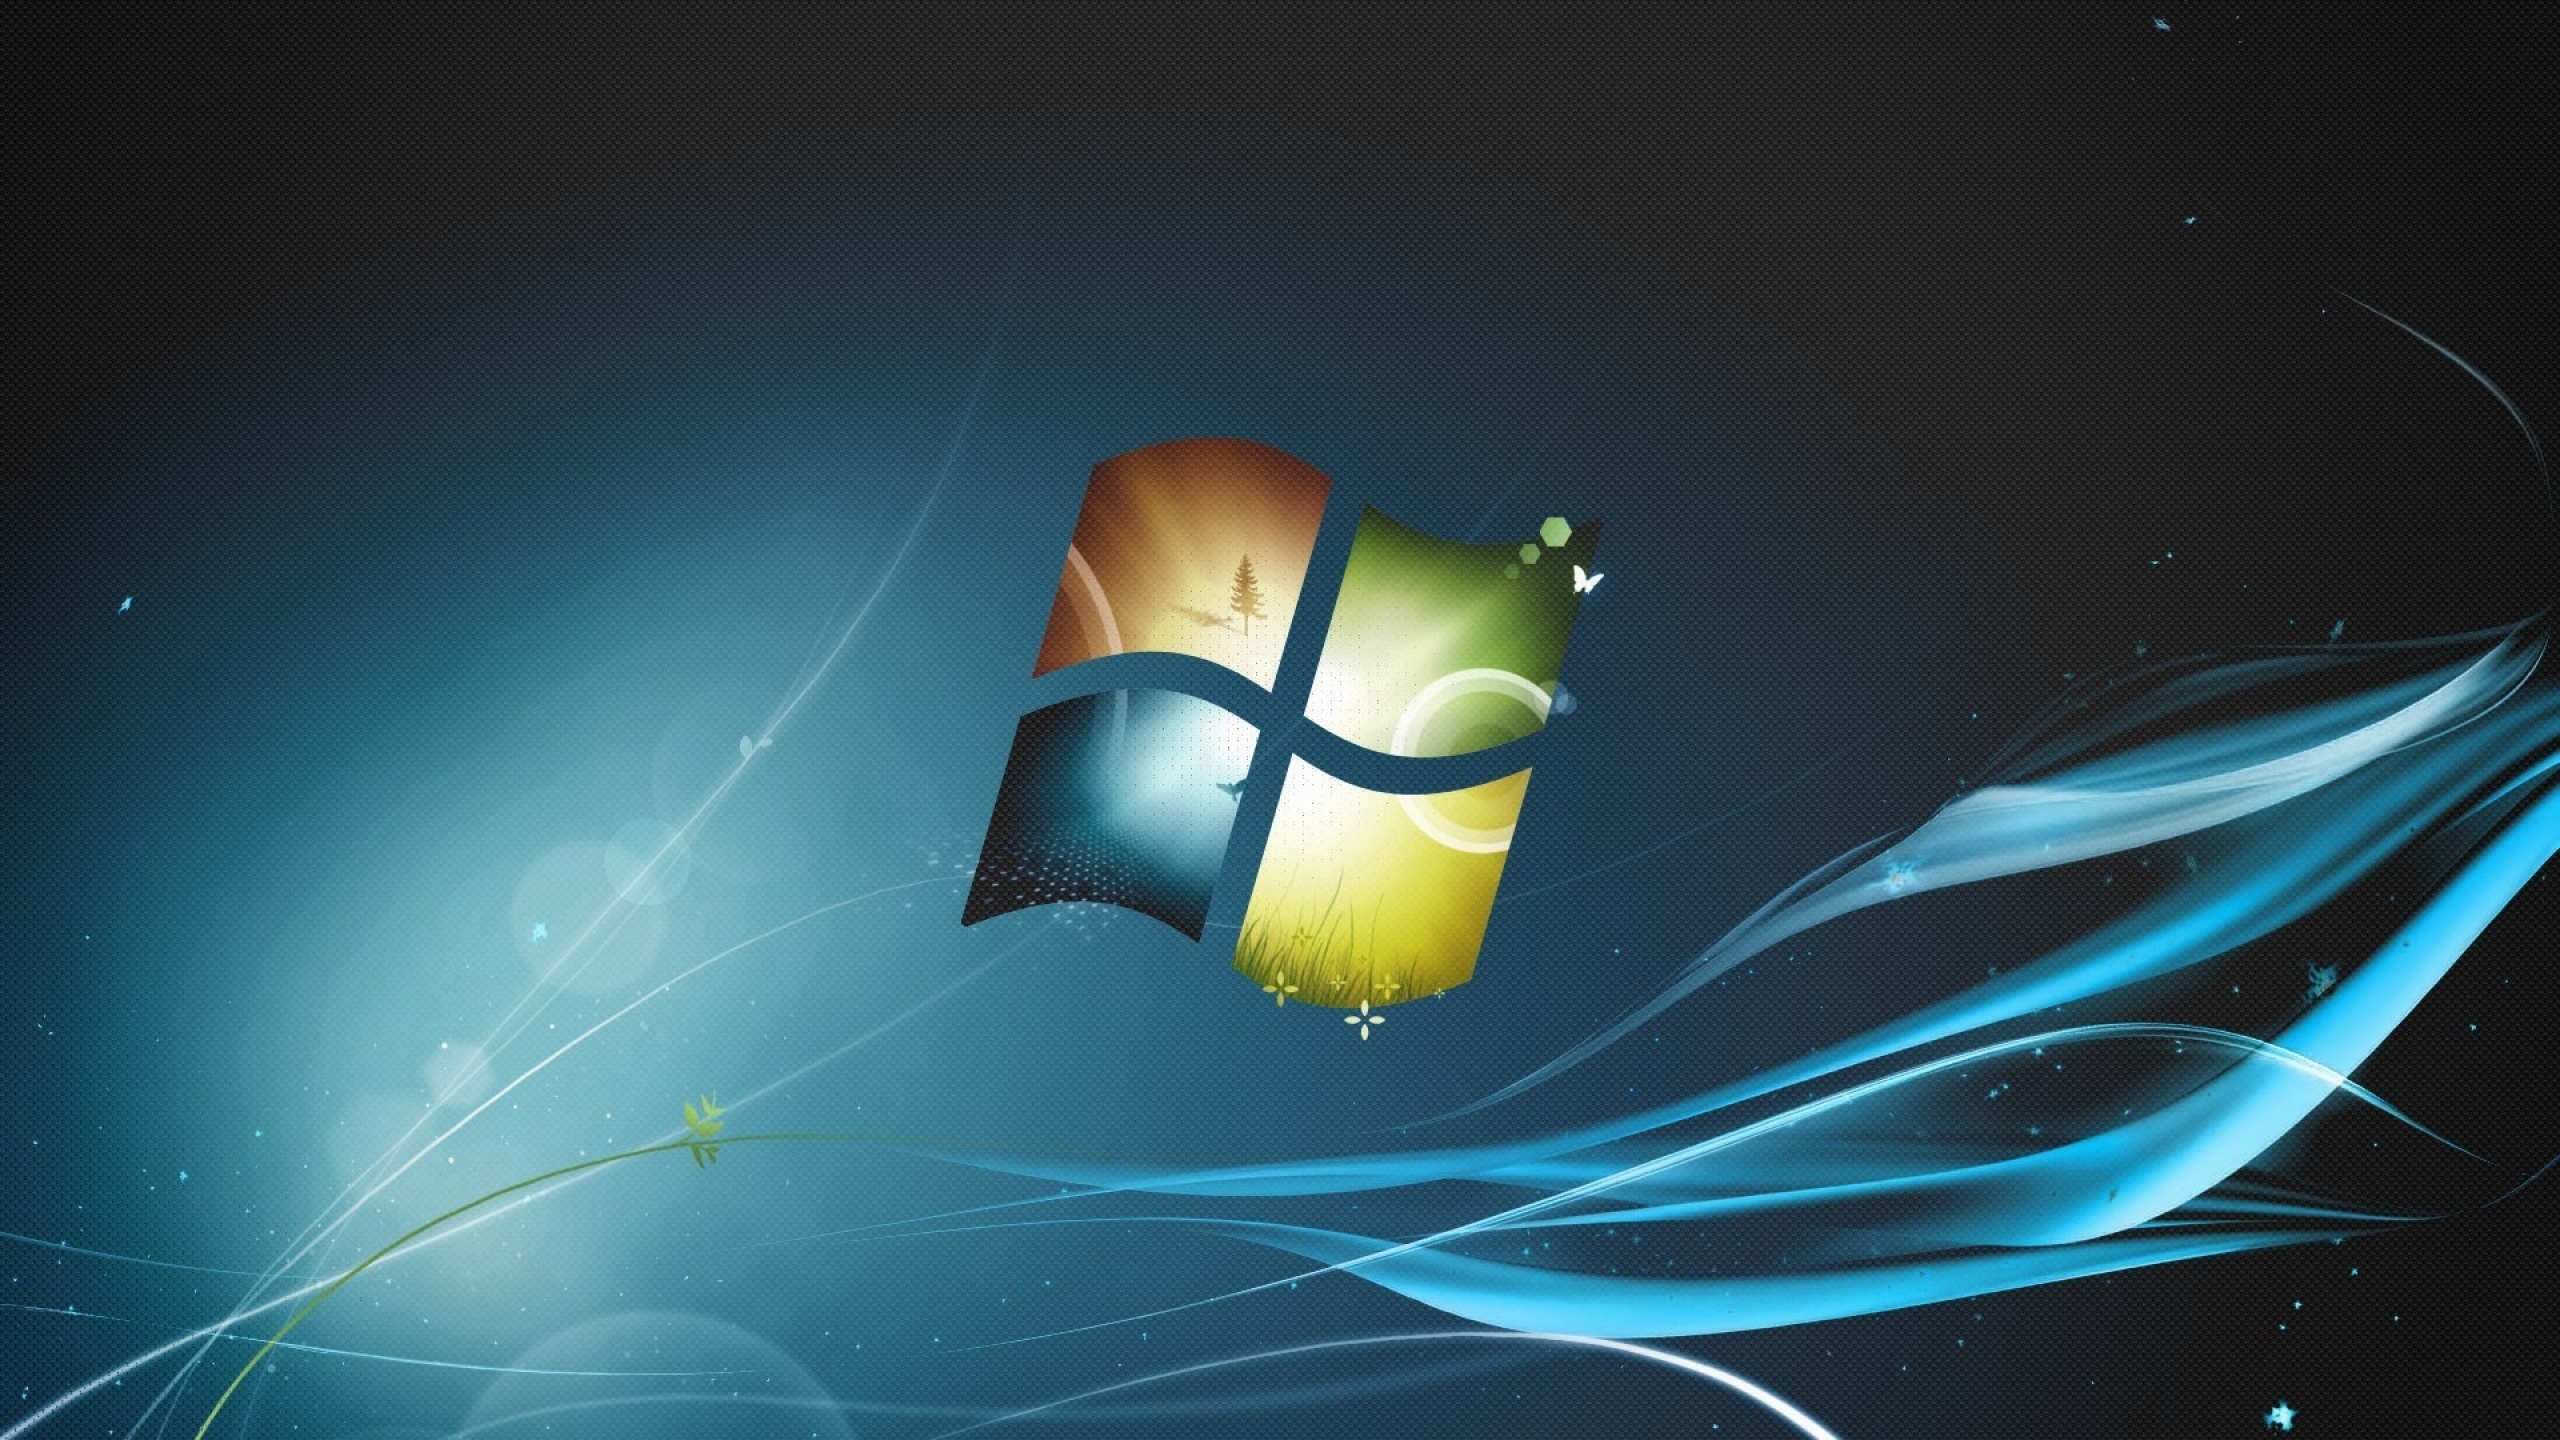 Weekly Wallpaper: Show Your Windows Pride